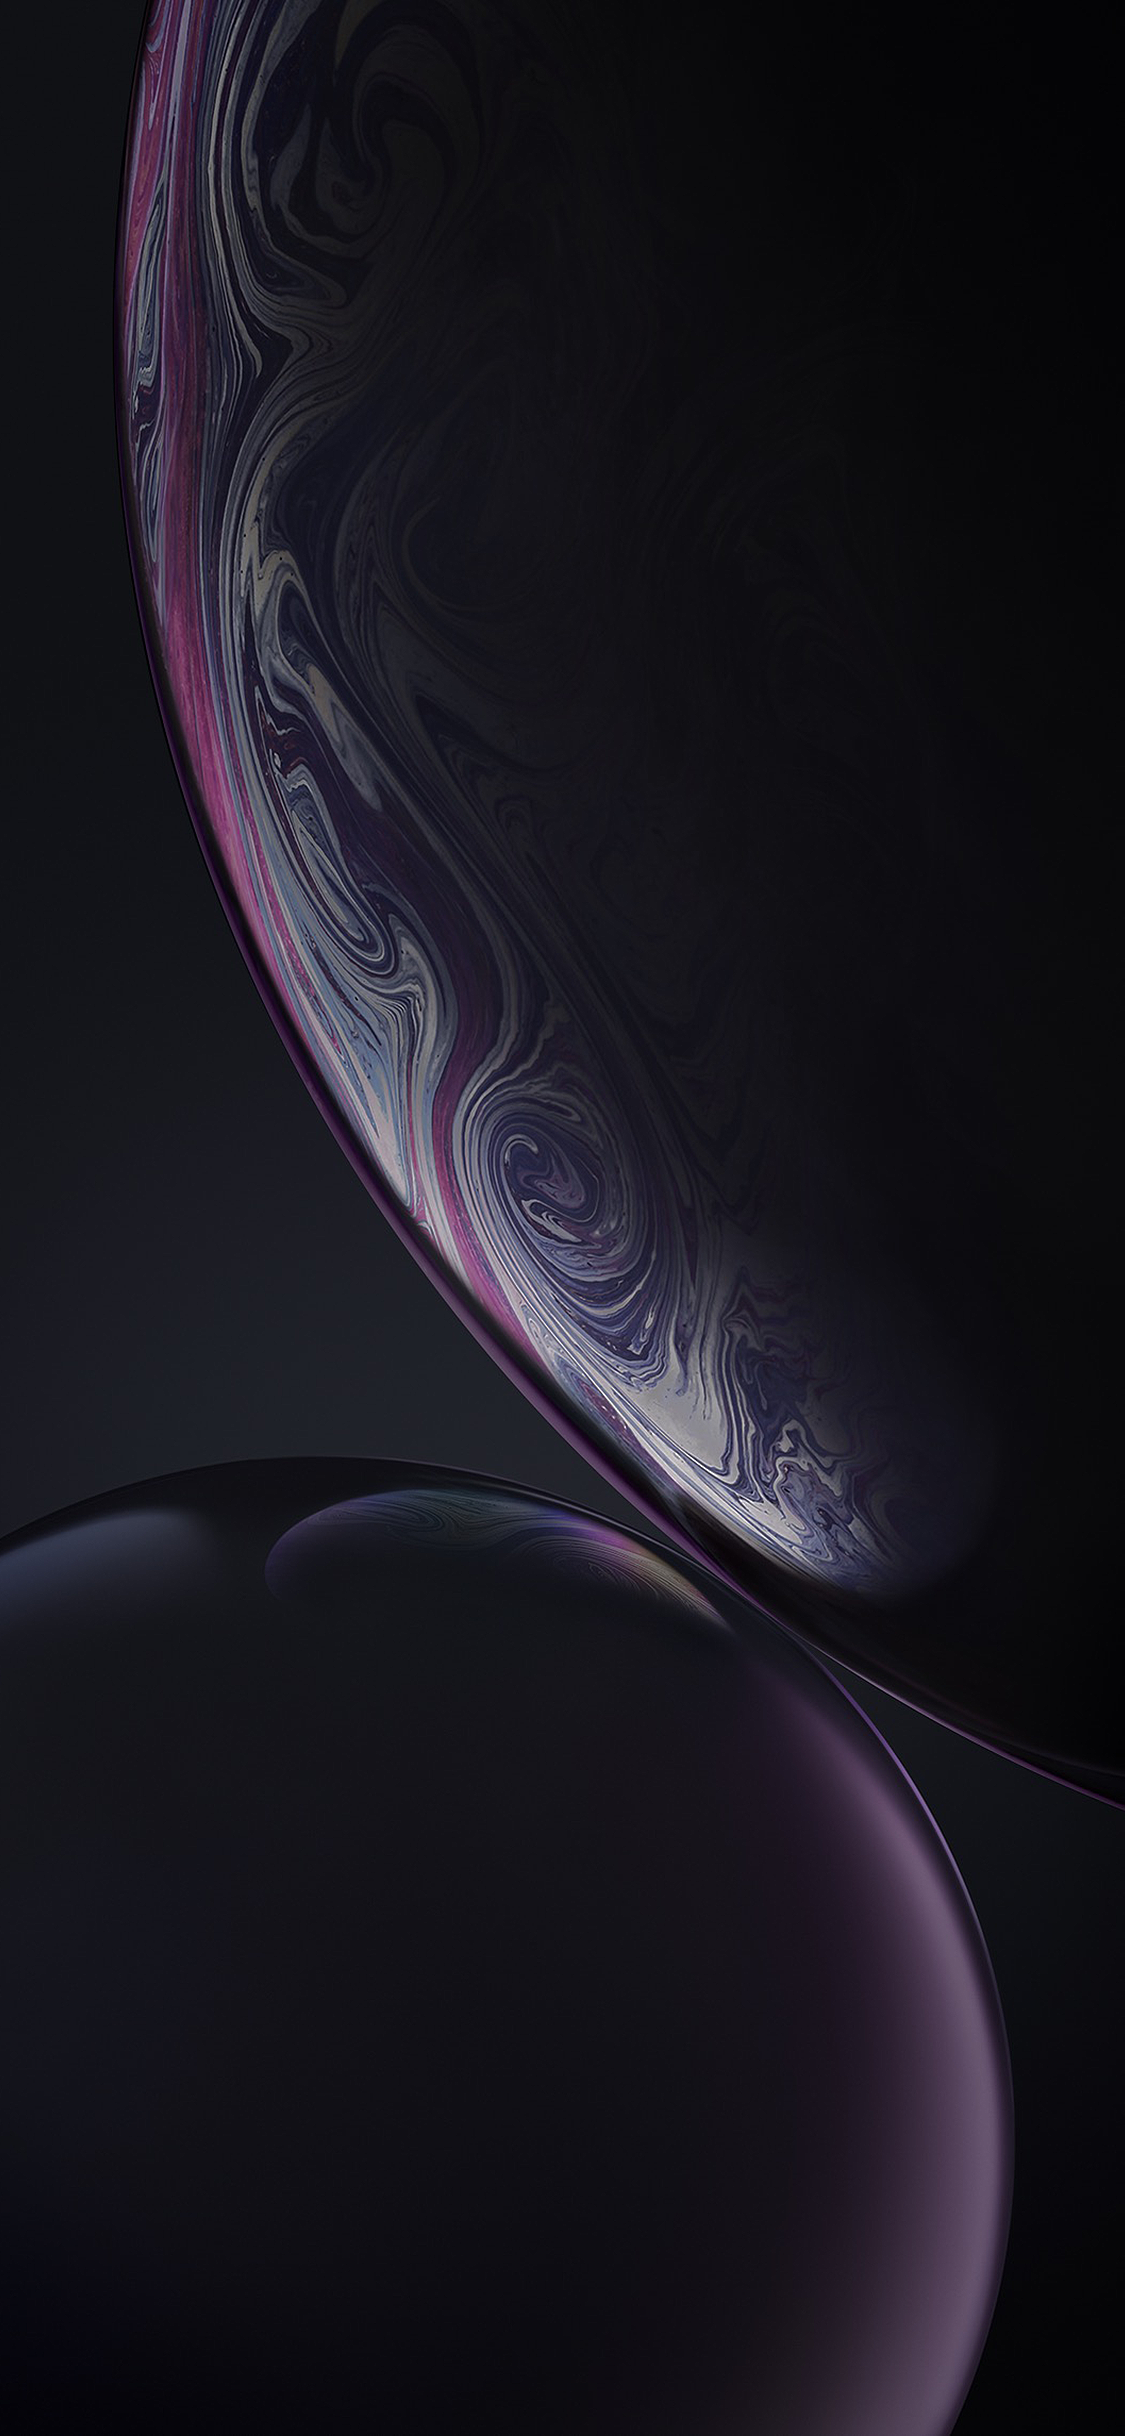 Wallpapers Iphone Xs Iphone Xs Max And Iphone Xr